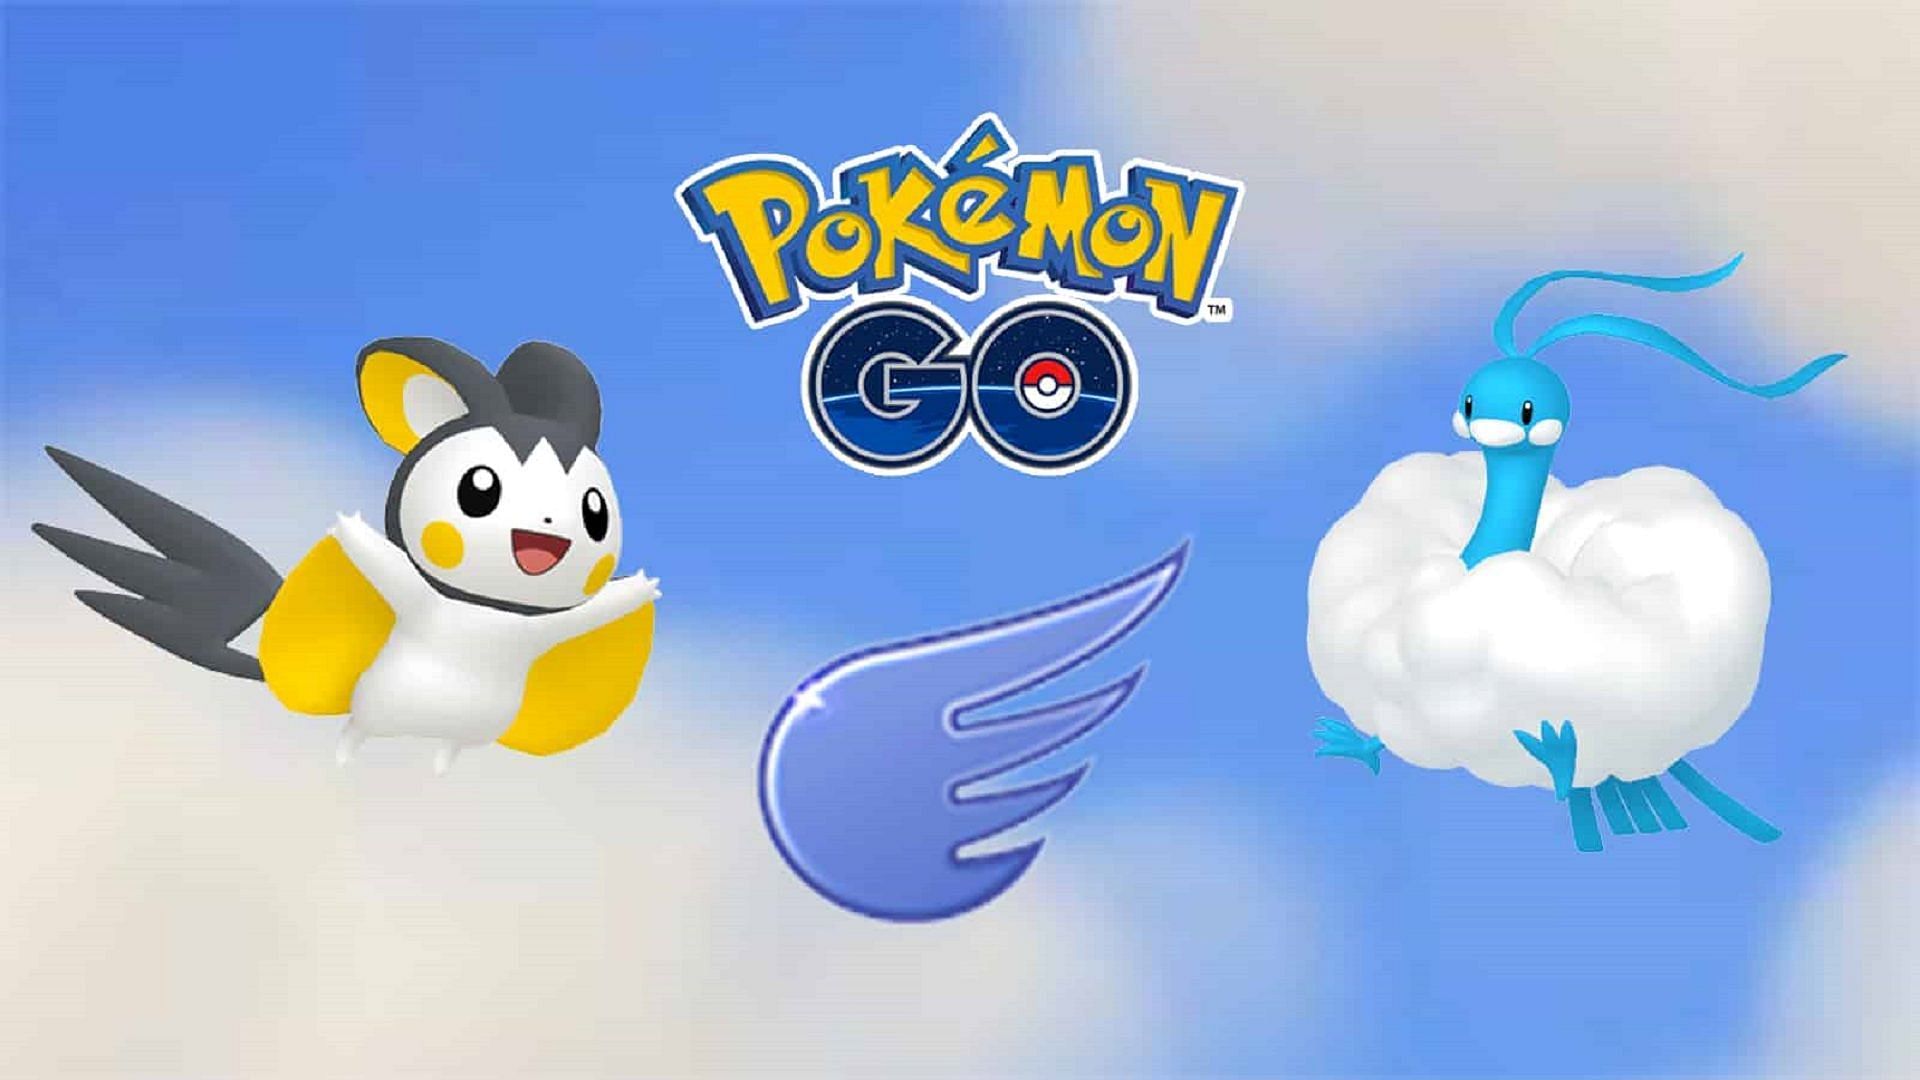 Emolga and Altaria, two partial Flying-types in Pokemon GO (Image via Niantic)